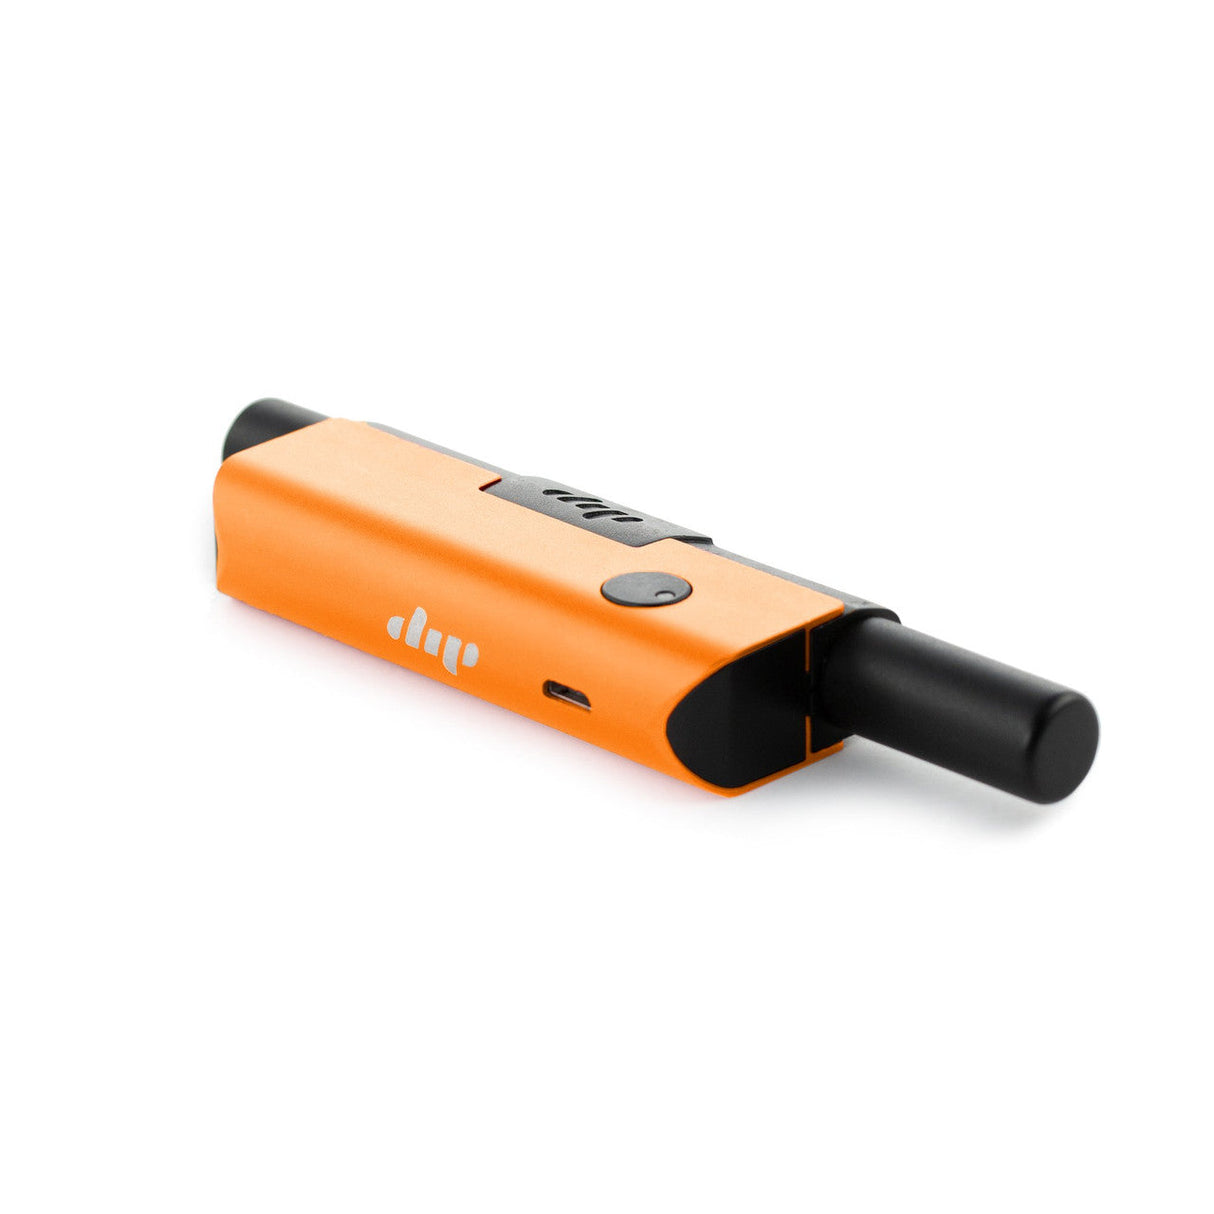 Dip Devices Evri Starter Kit in orange, portable battery-powered vaporizer for concentrates, side view